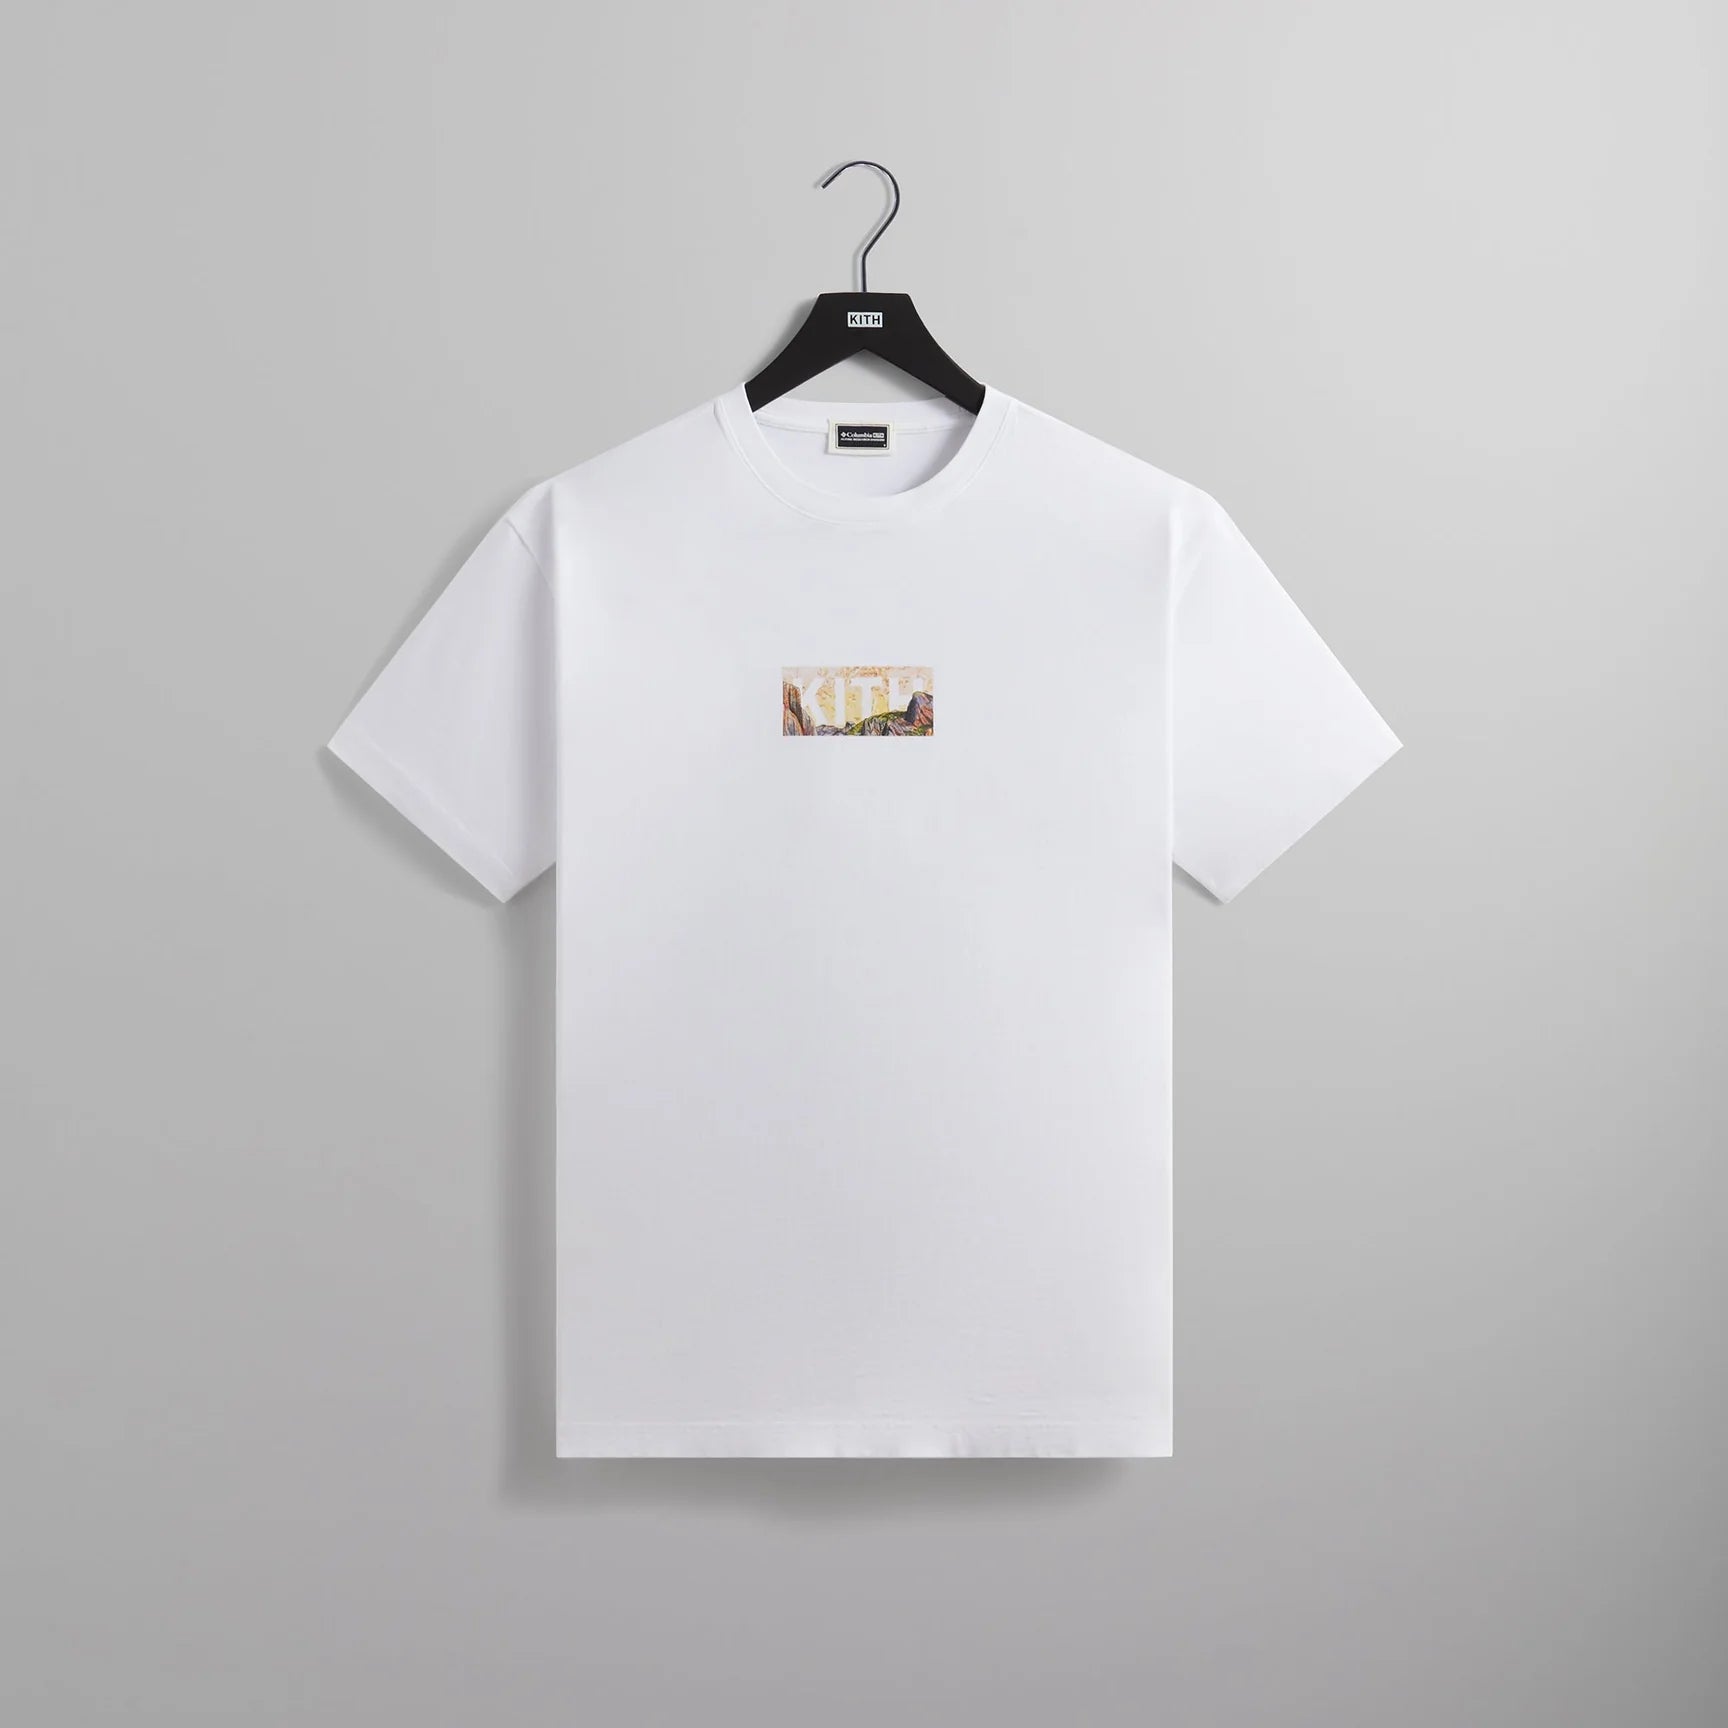 Kith x Columbia Yosemite Classic Logo Tee White by Kith from £115.00